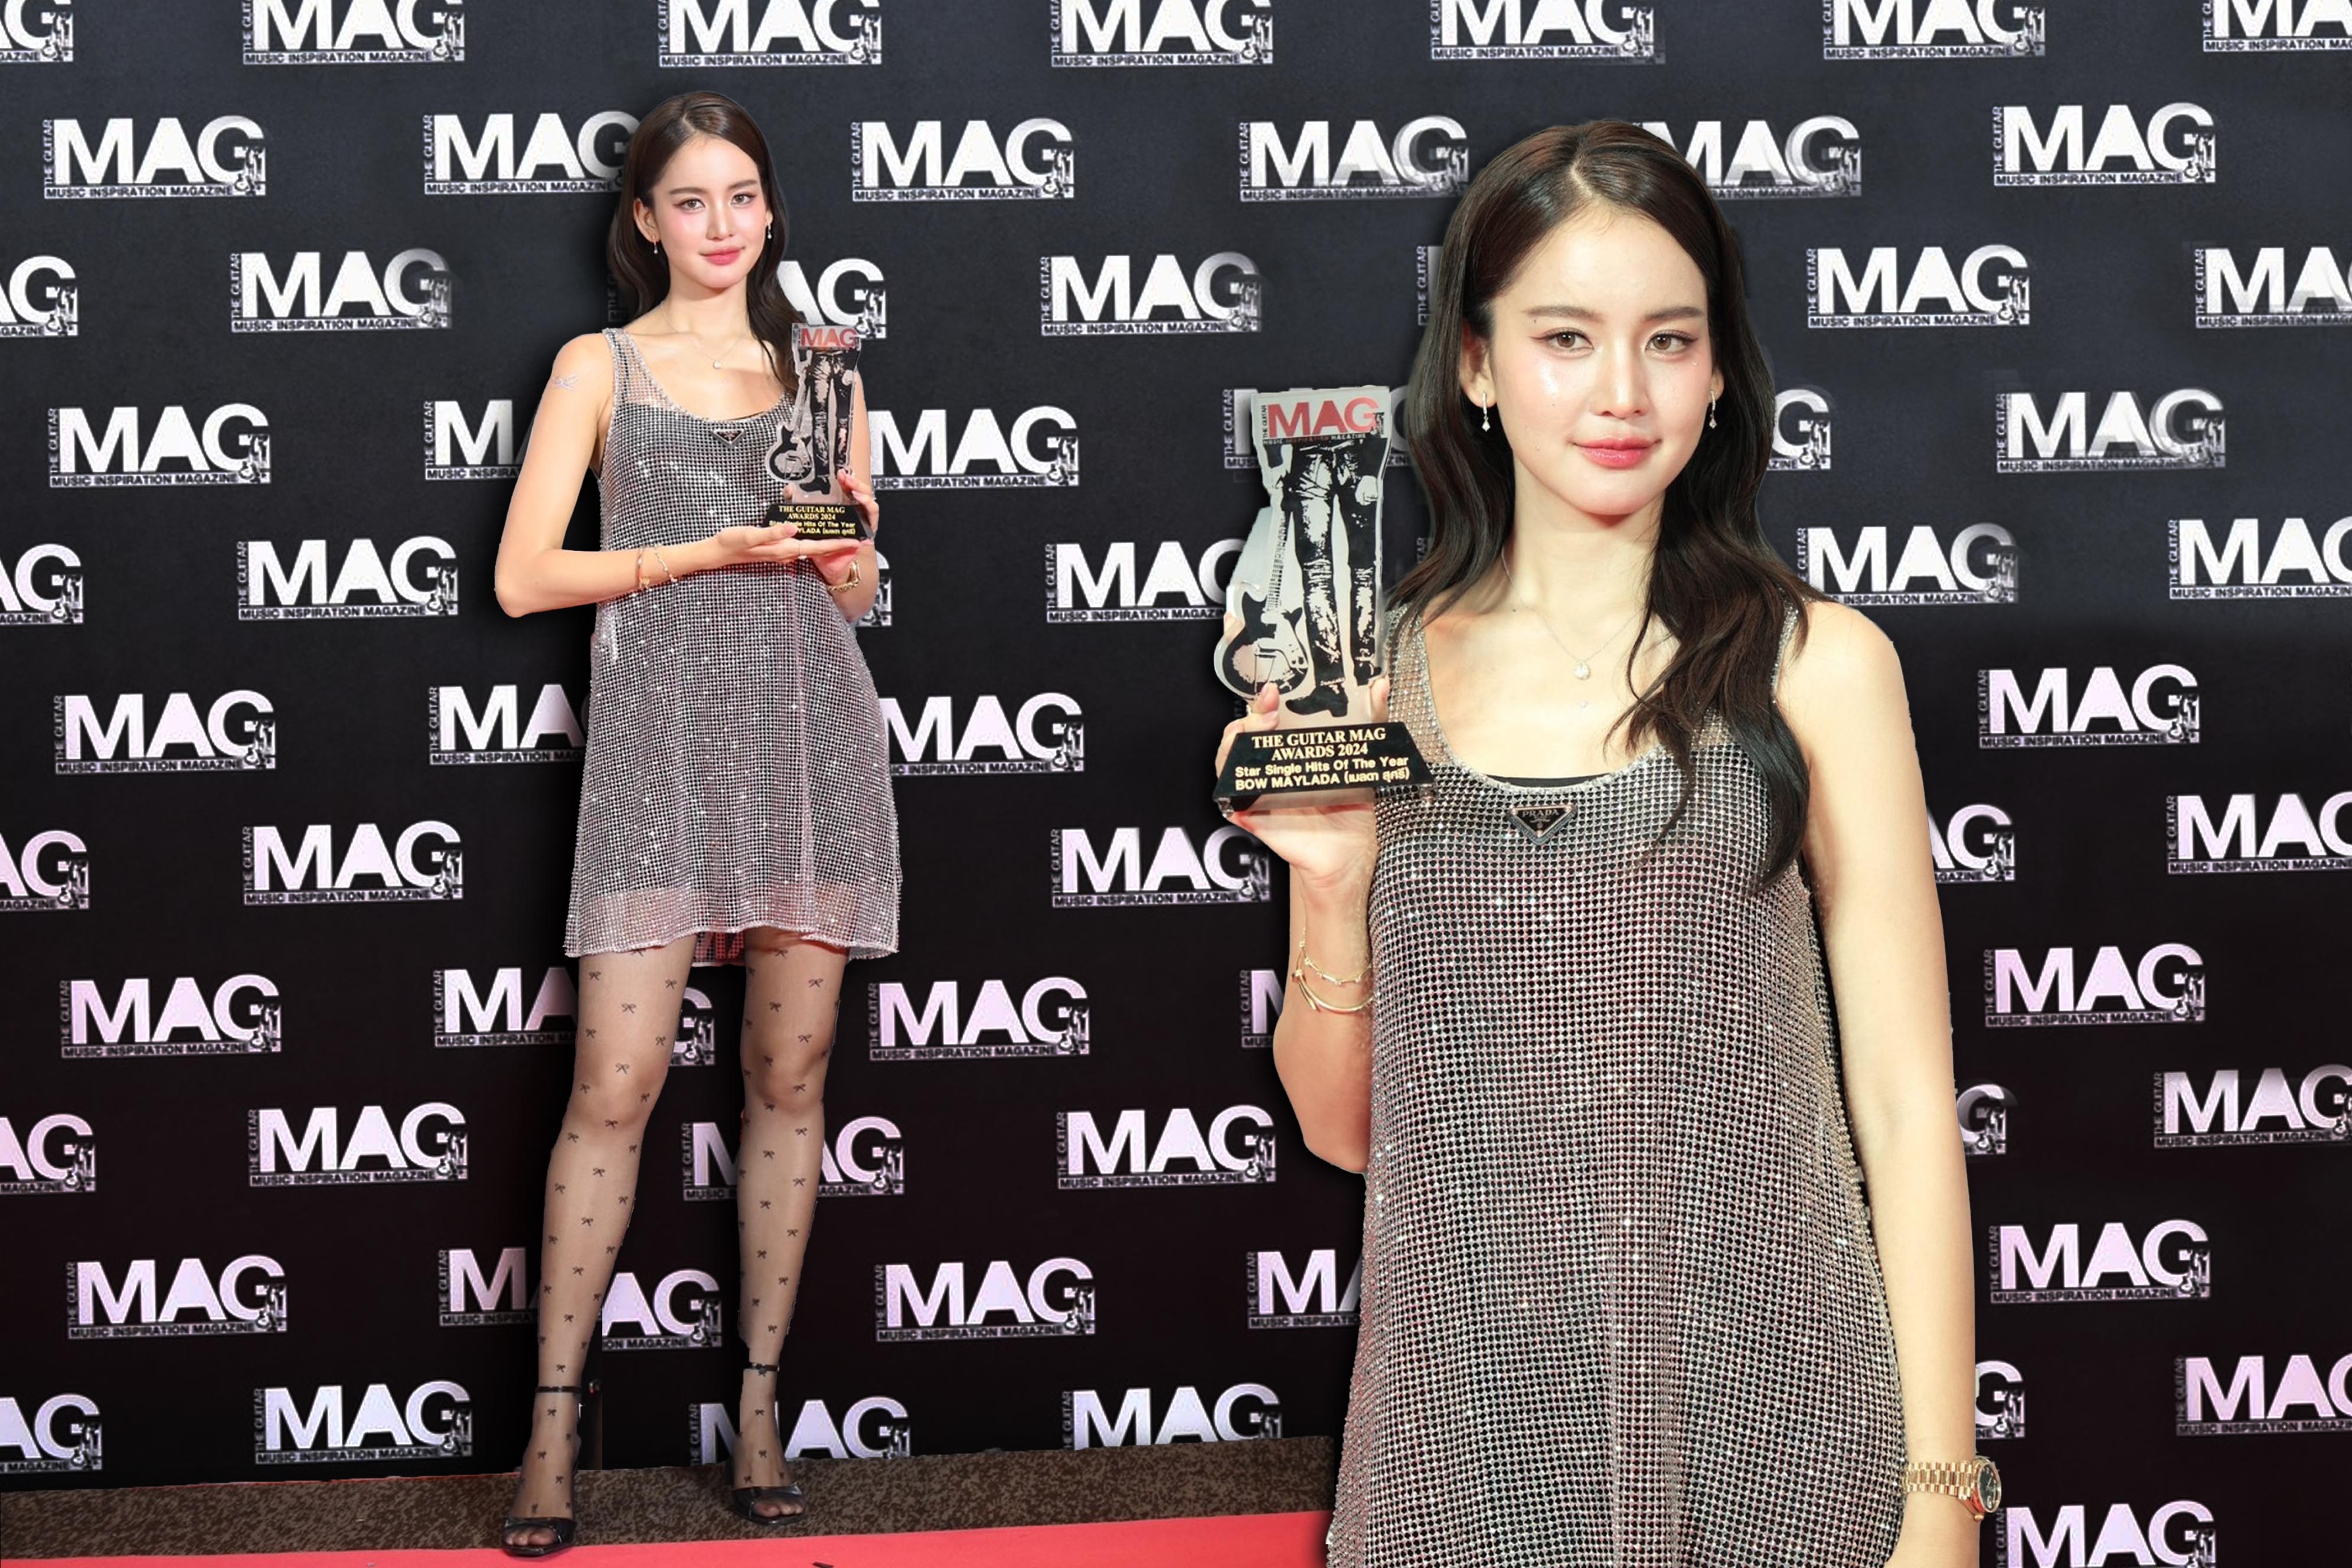 Bow Maylada Received the Guitar Mag Awards for Her First Single